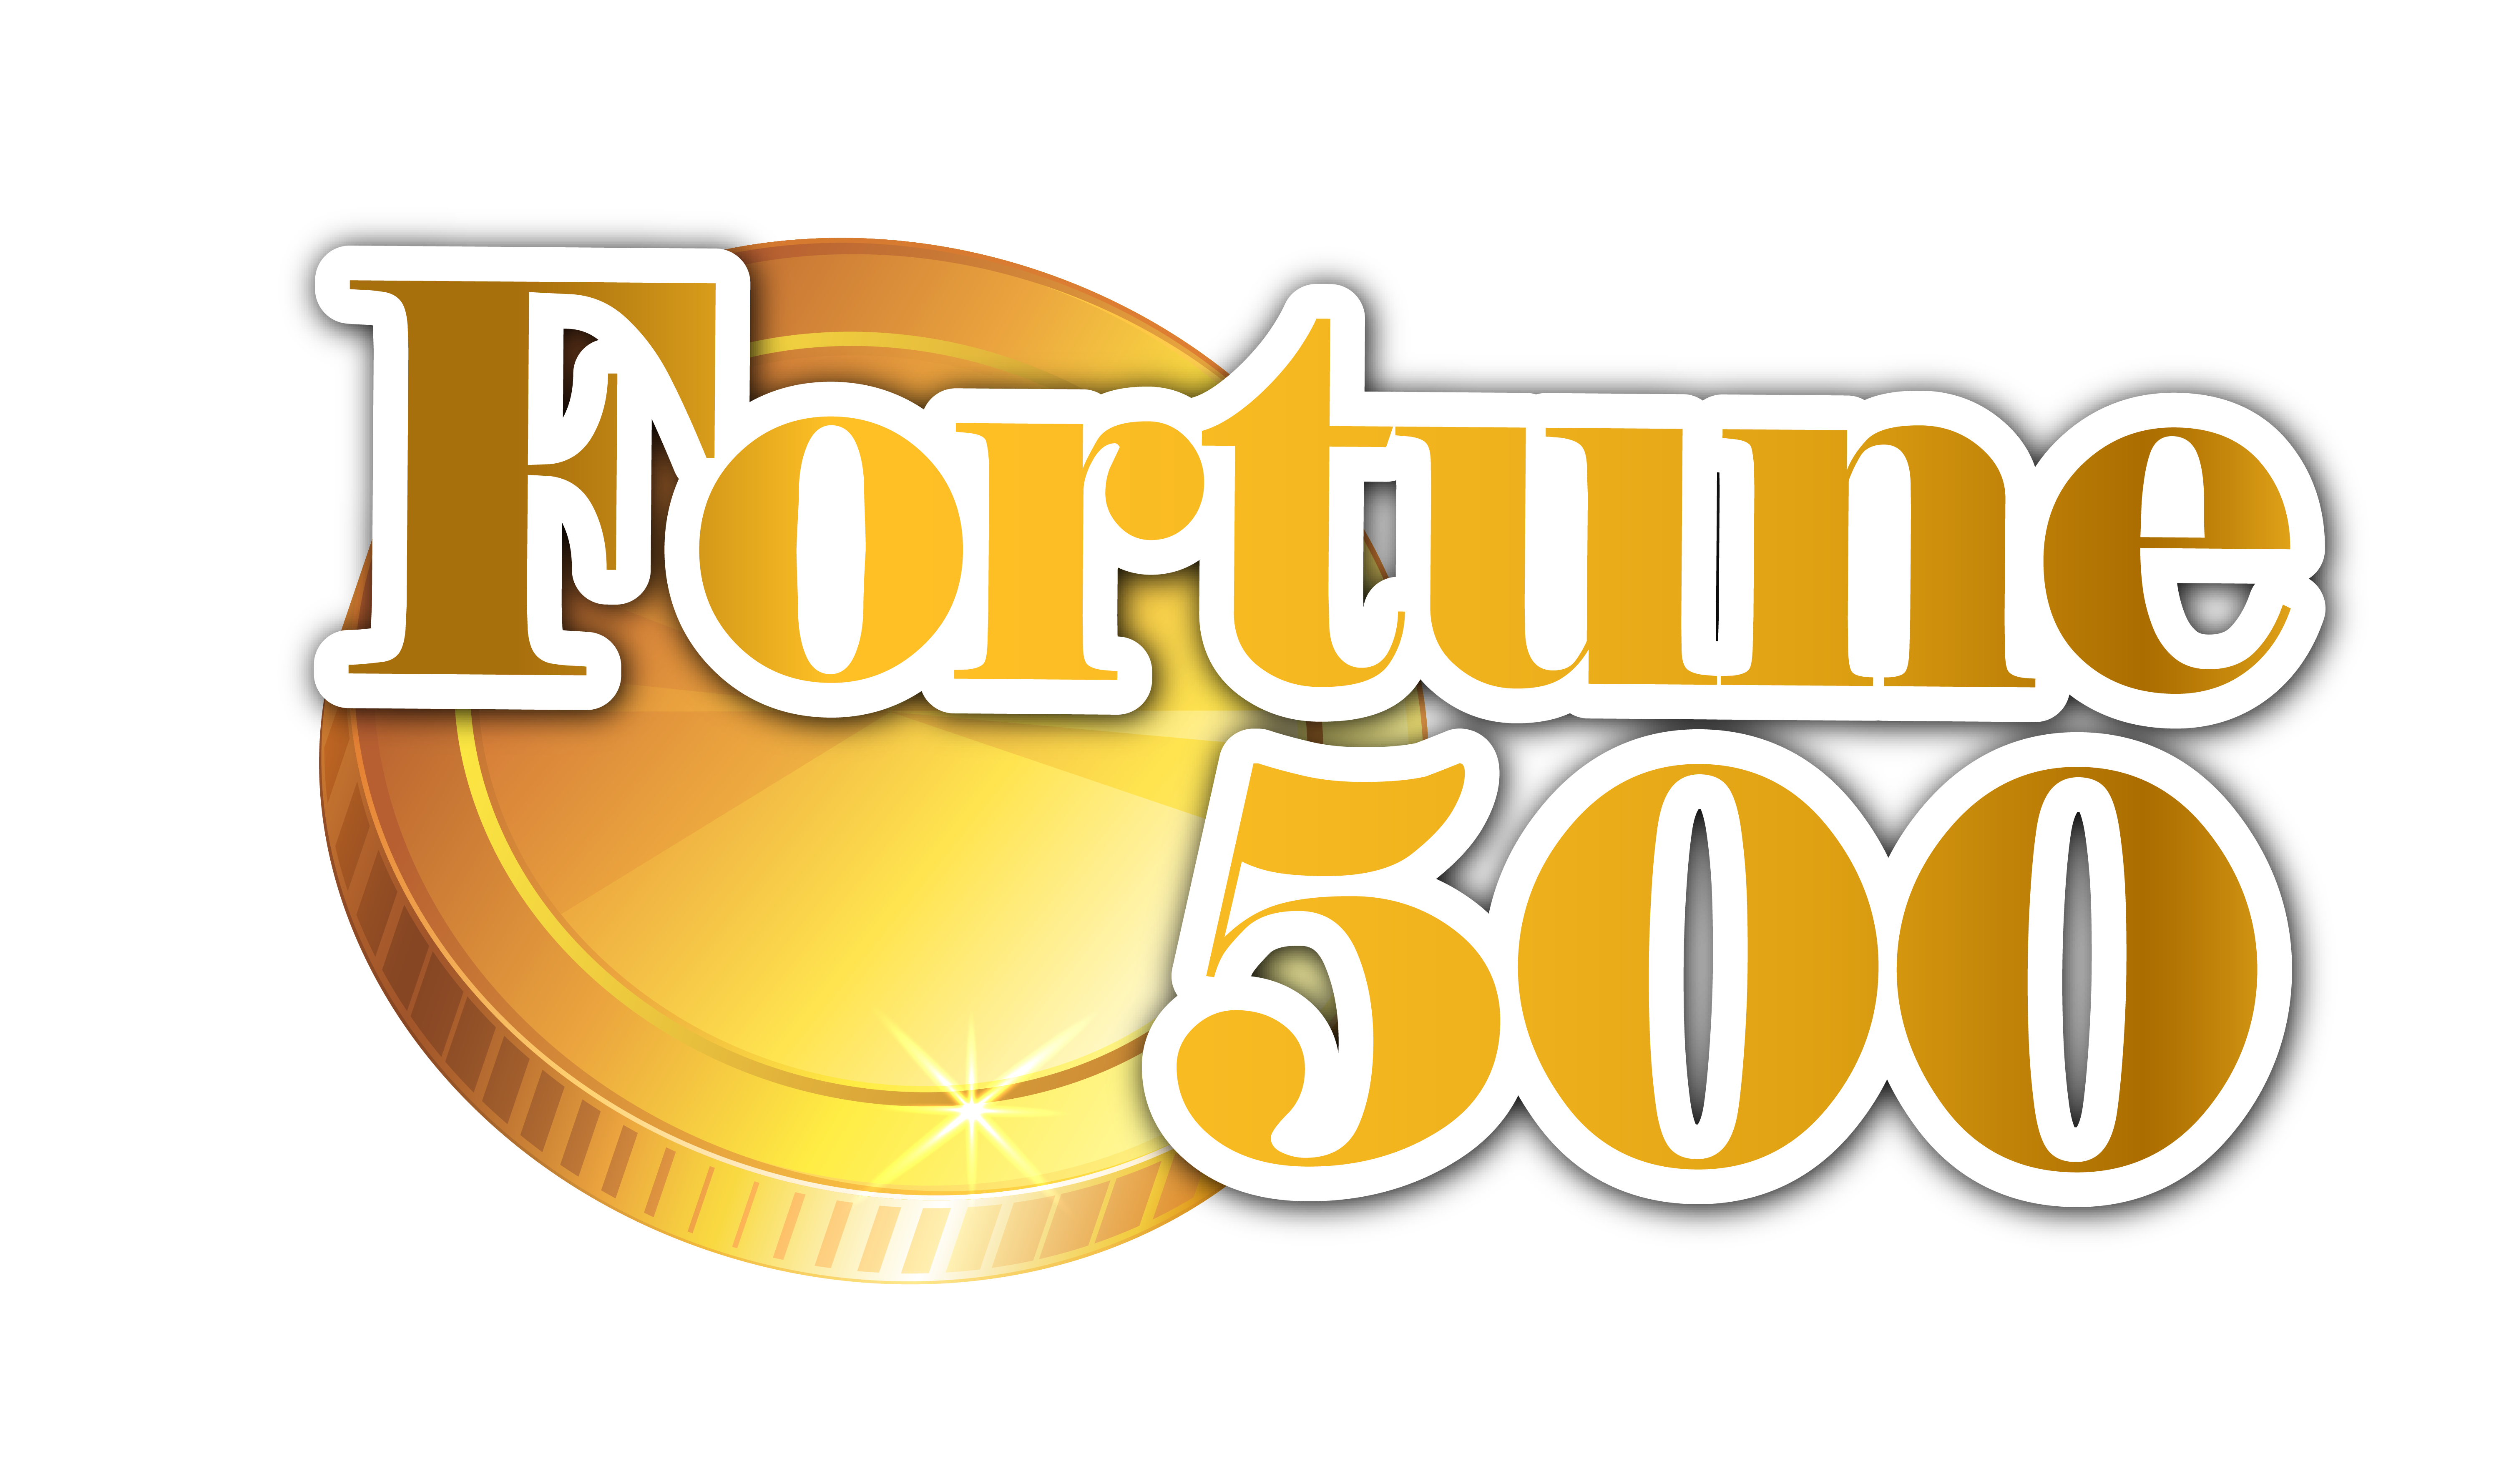 Fortune 500 Logo Png